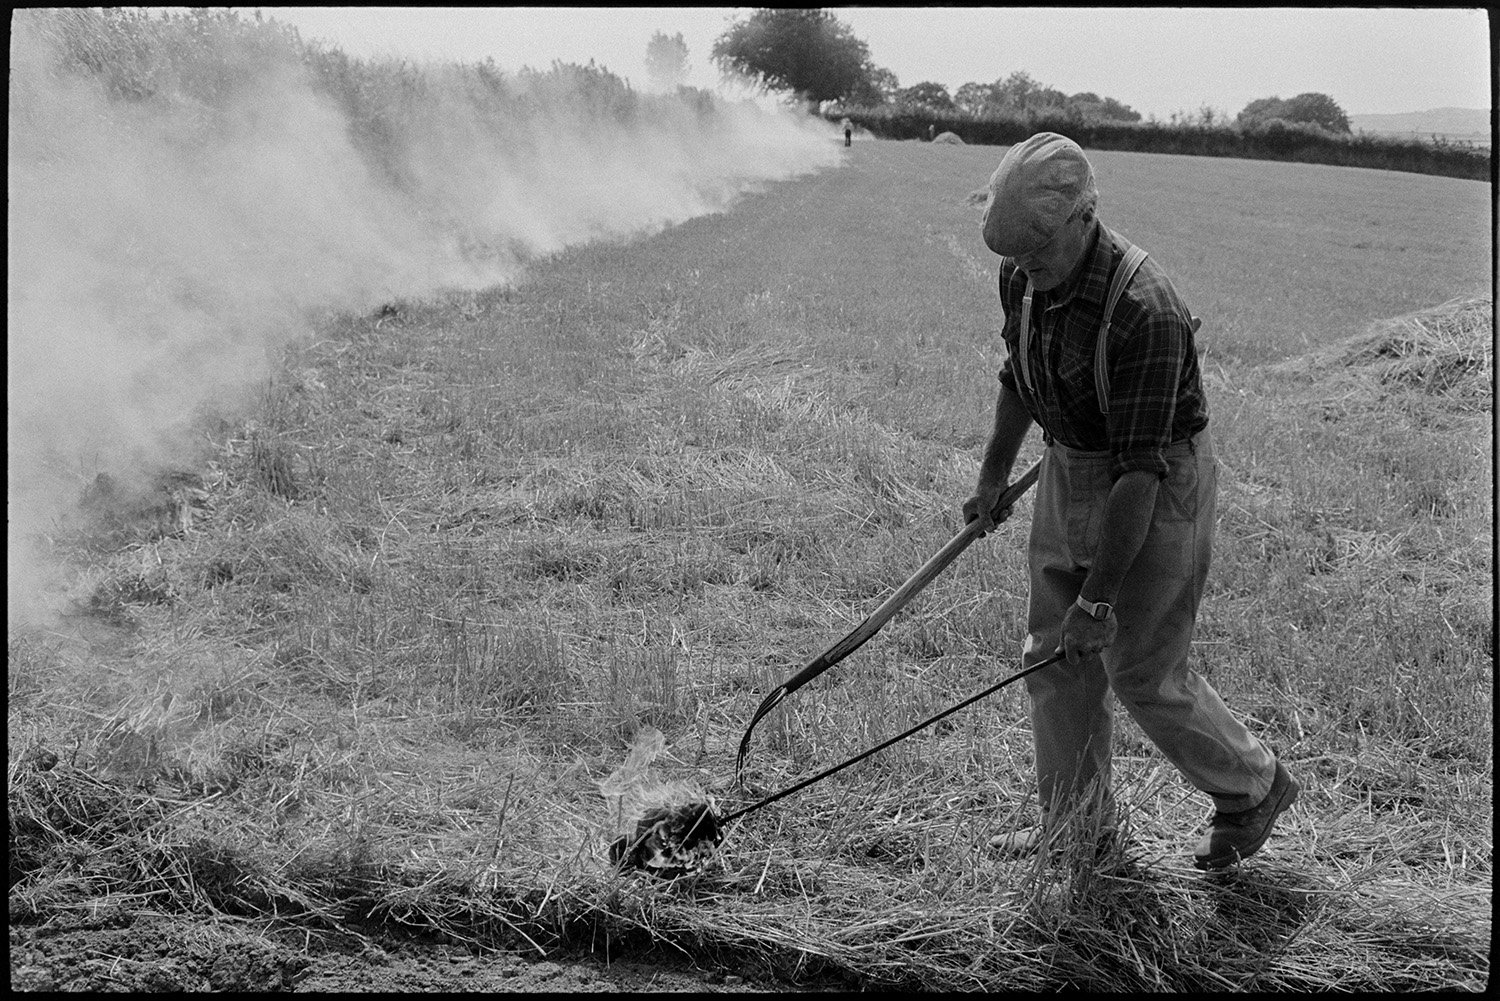 Farmer burning stubble. 
[Alf Pugsley burning crop stubble in a field at Lower Langham, Dolton. He is using a flaming torch and a fork. Smoke is rising from the burnt areas in the background.]